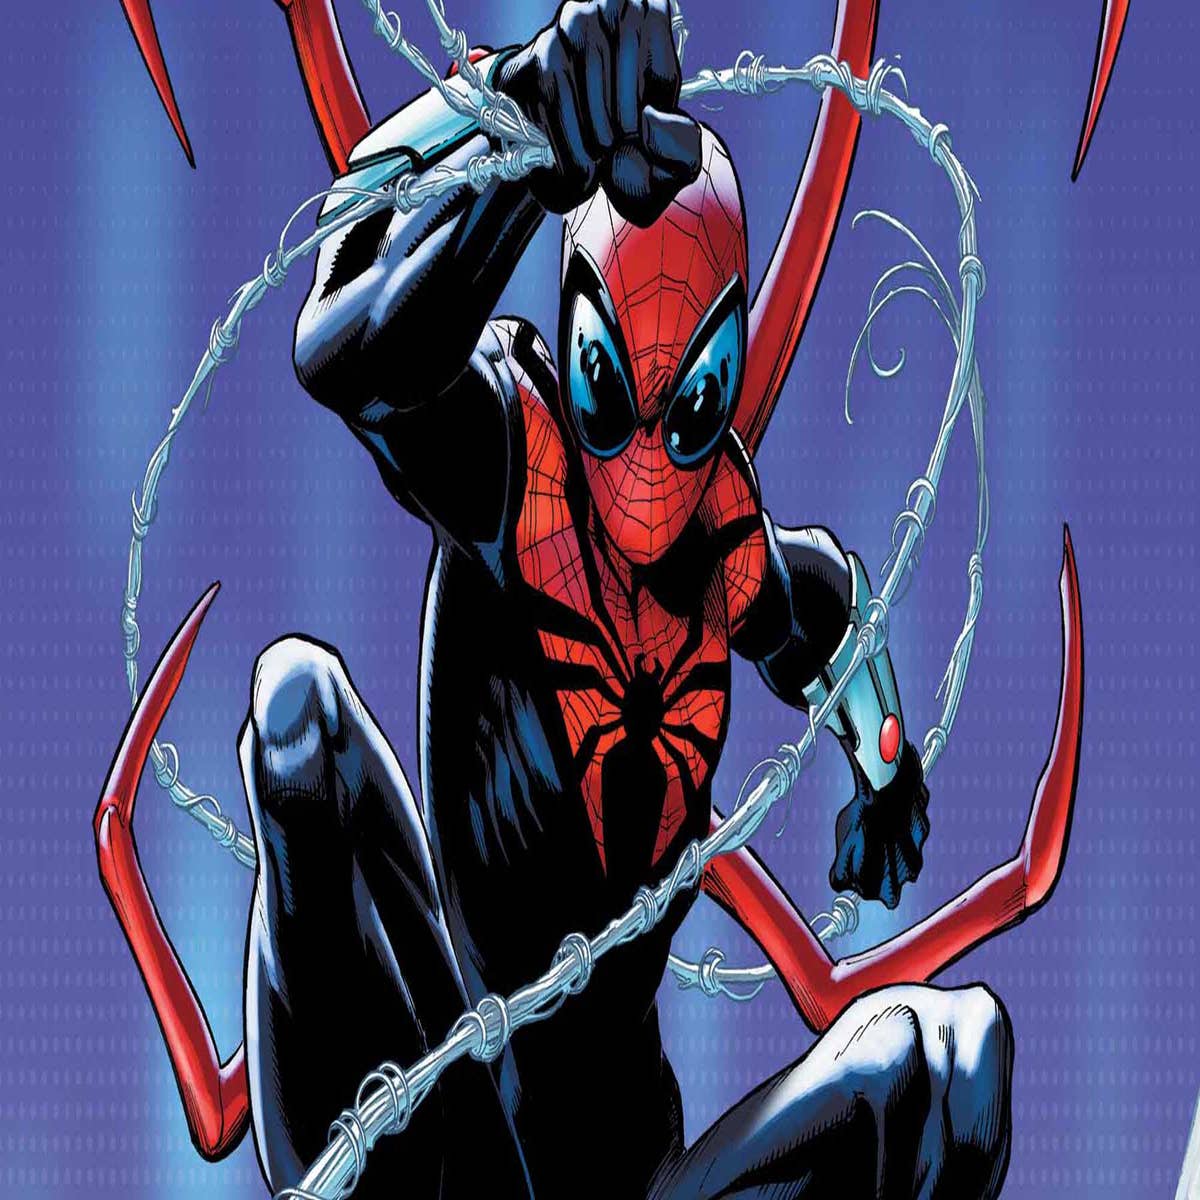 Marvel's Spider-Man ongoing ends, to make way for an all-new Superior Spider -Man ongoing